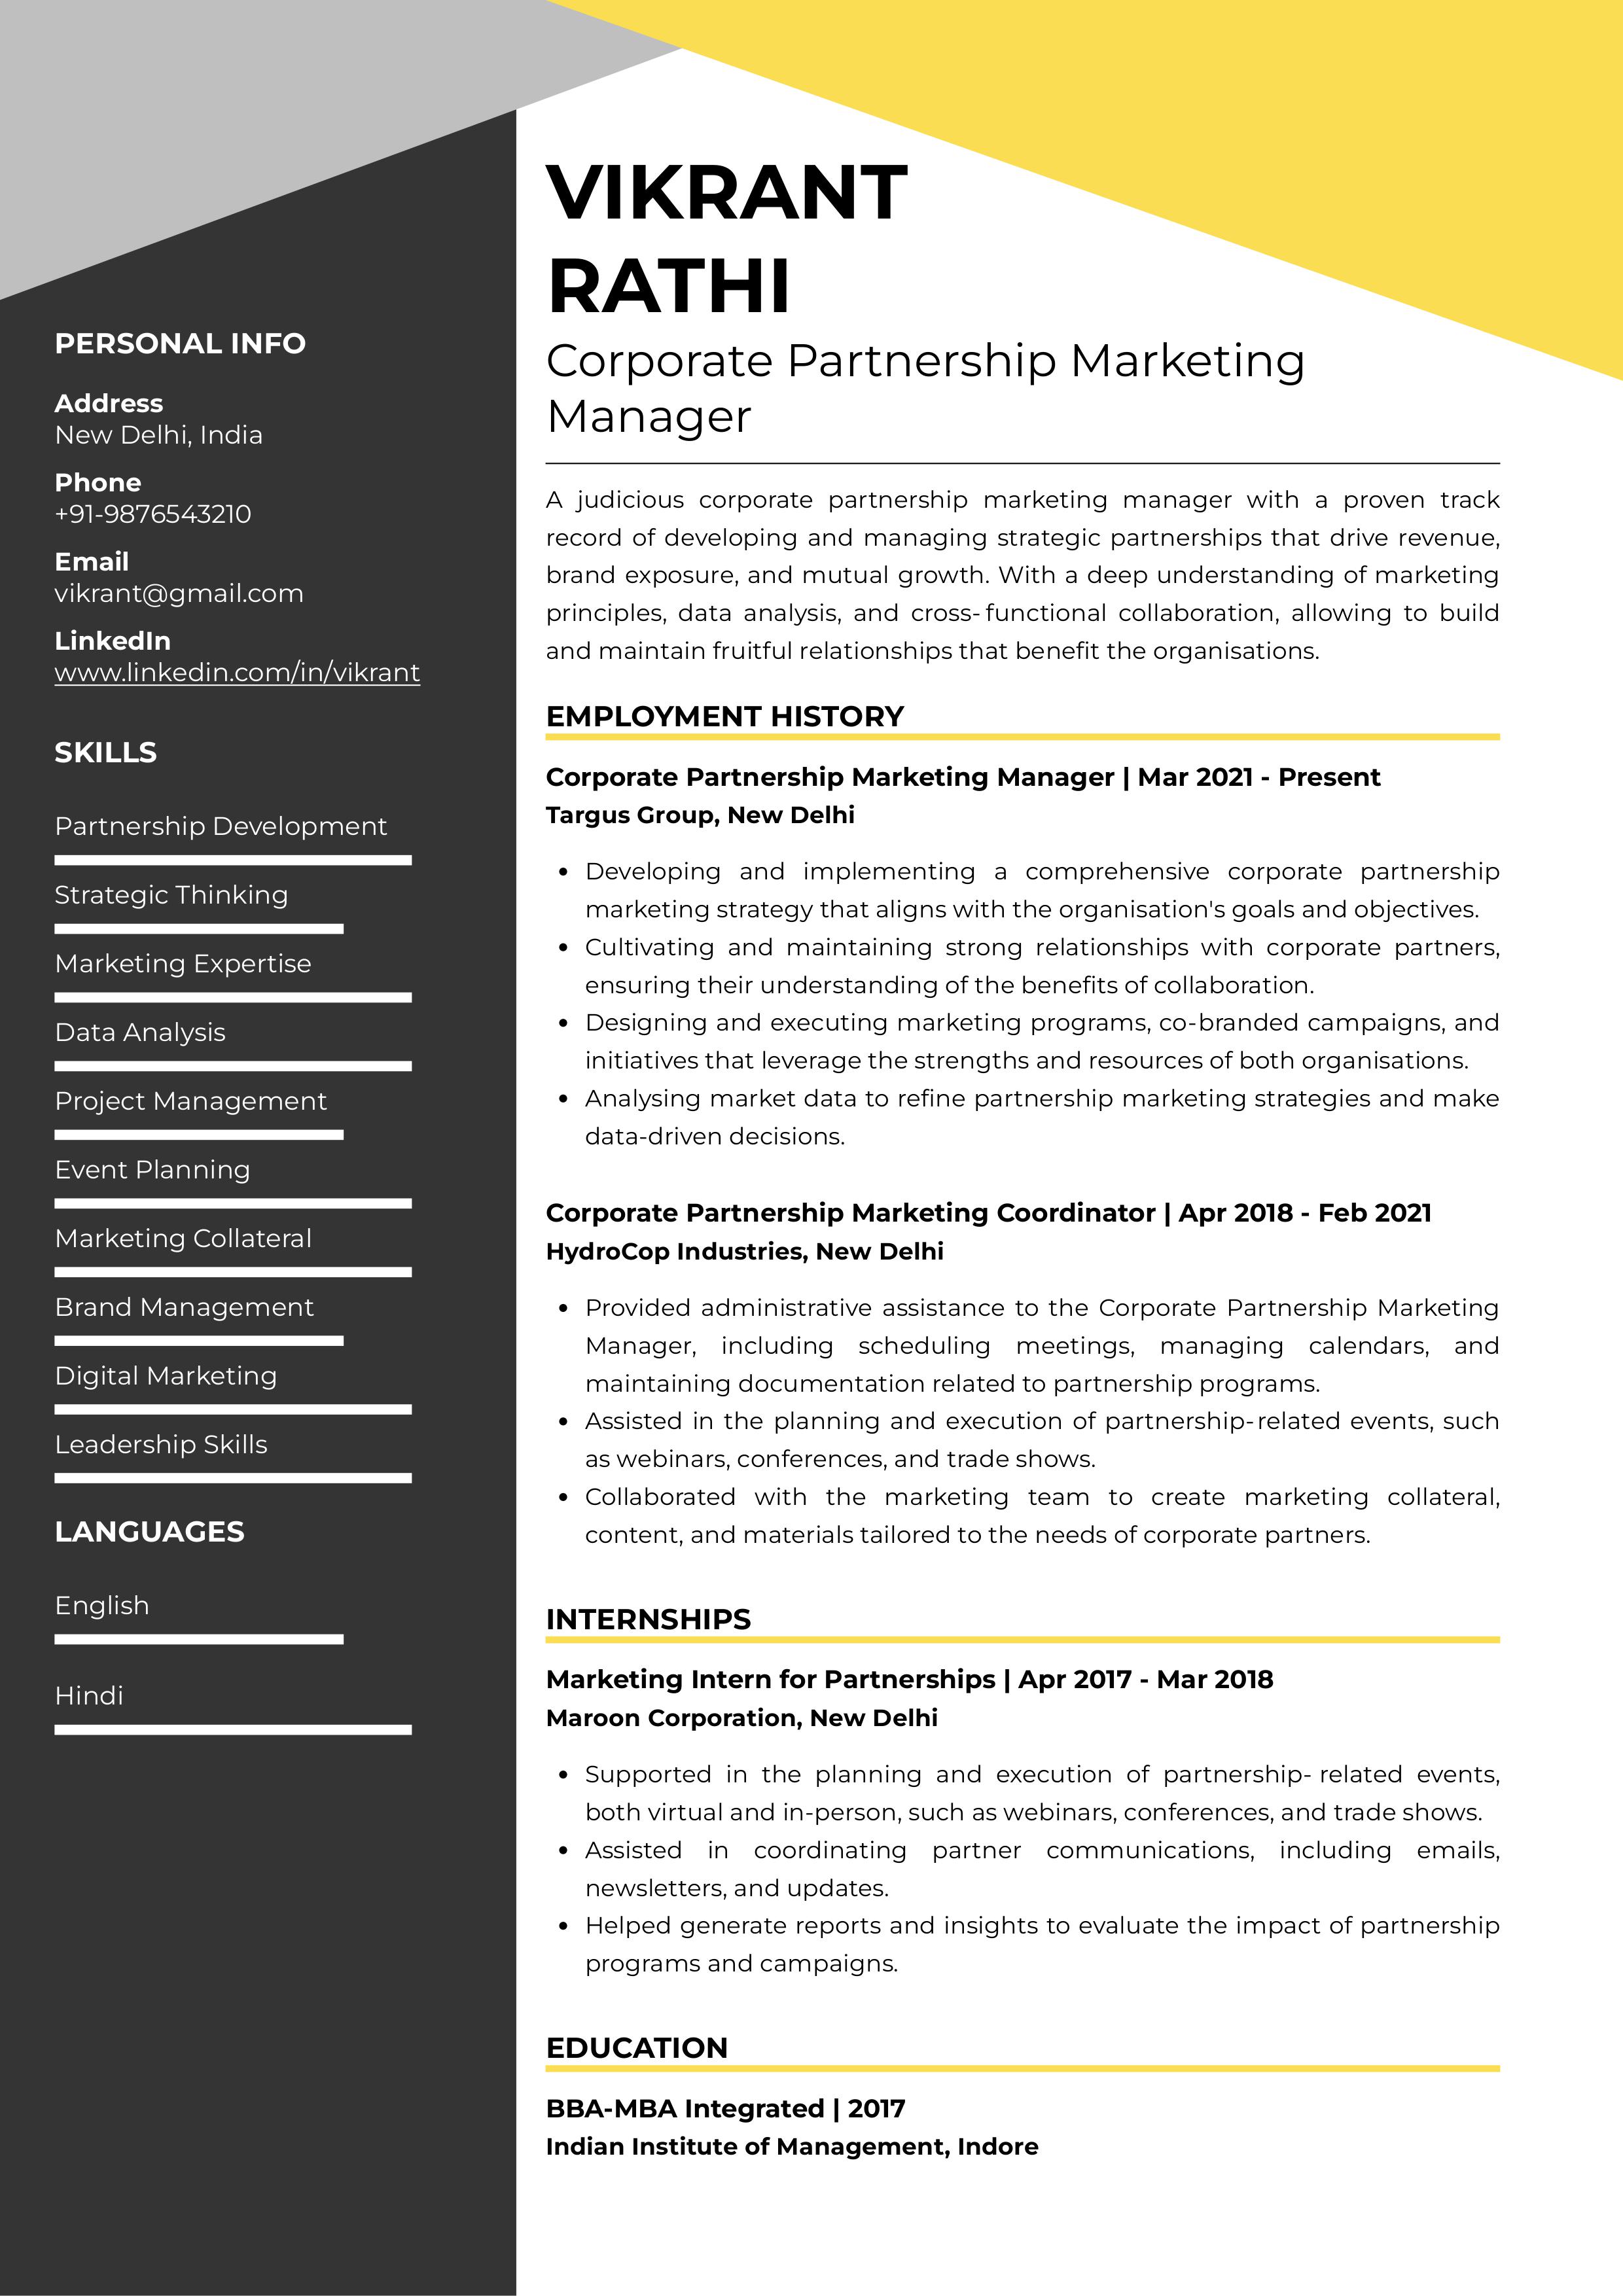 Sample Resume of Corporate Partnership Marketing Manager | Free Resume Templates & Samples on Resumod.co